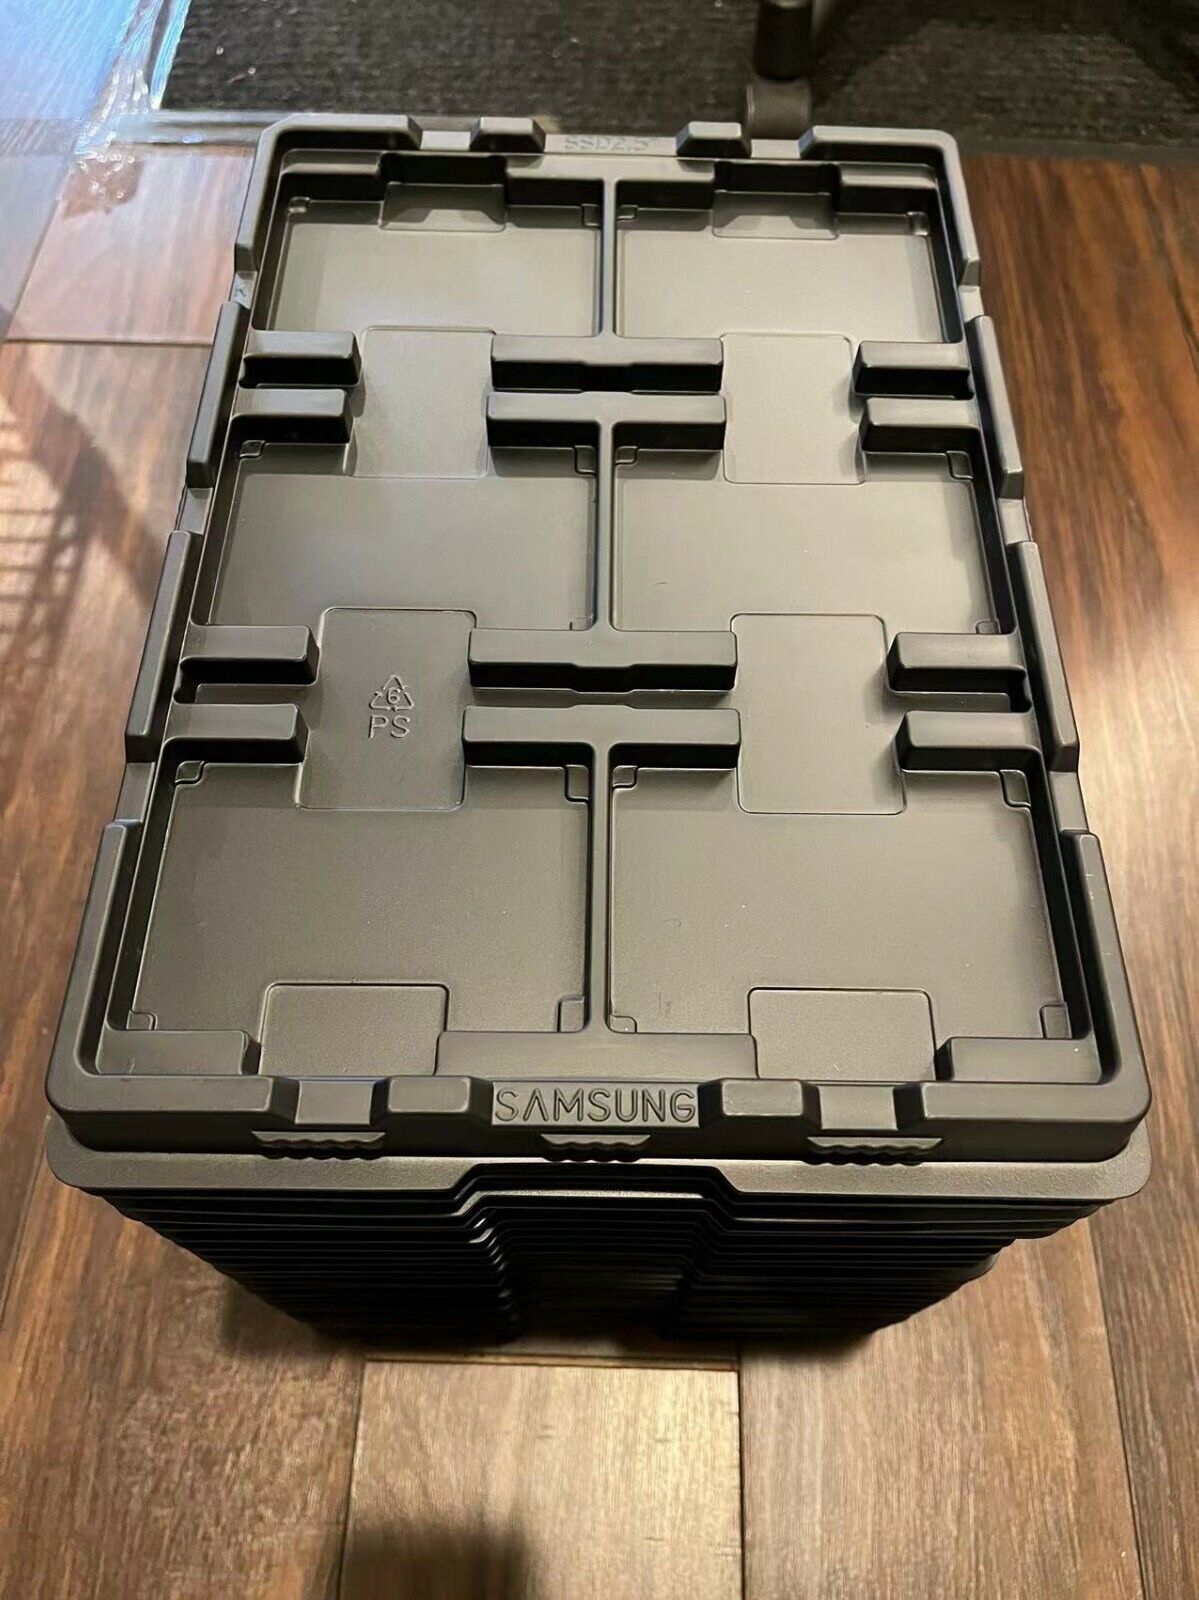 25 PCS SAMSUNG 2.5” SSD Strong Tray Holder Container